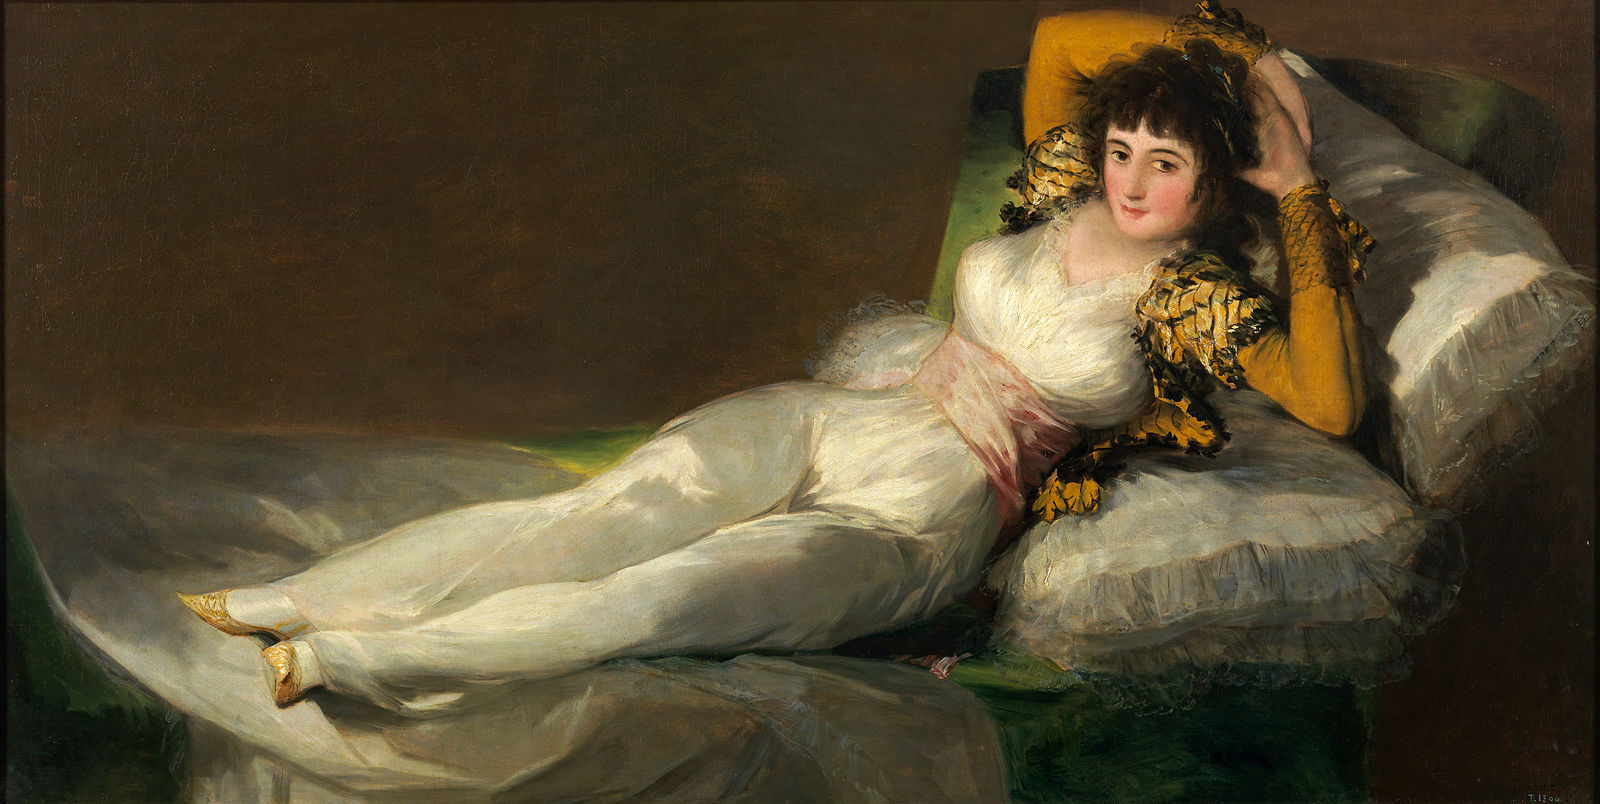 A reclining woman dressed in white linen dress